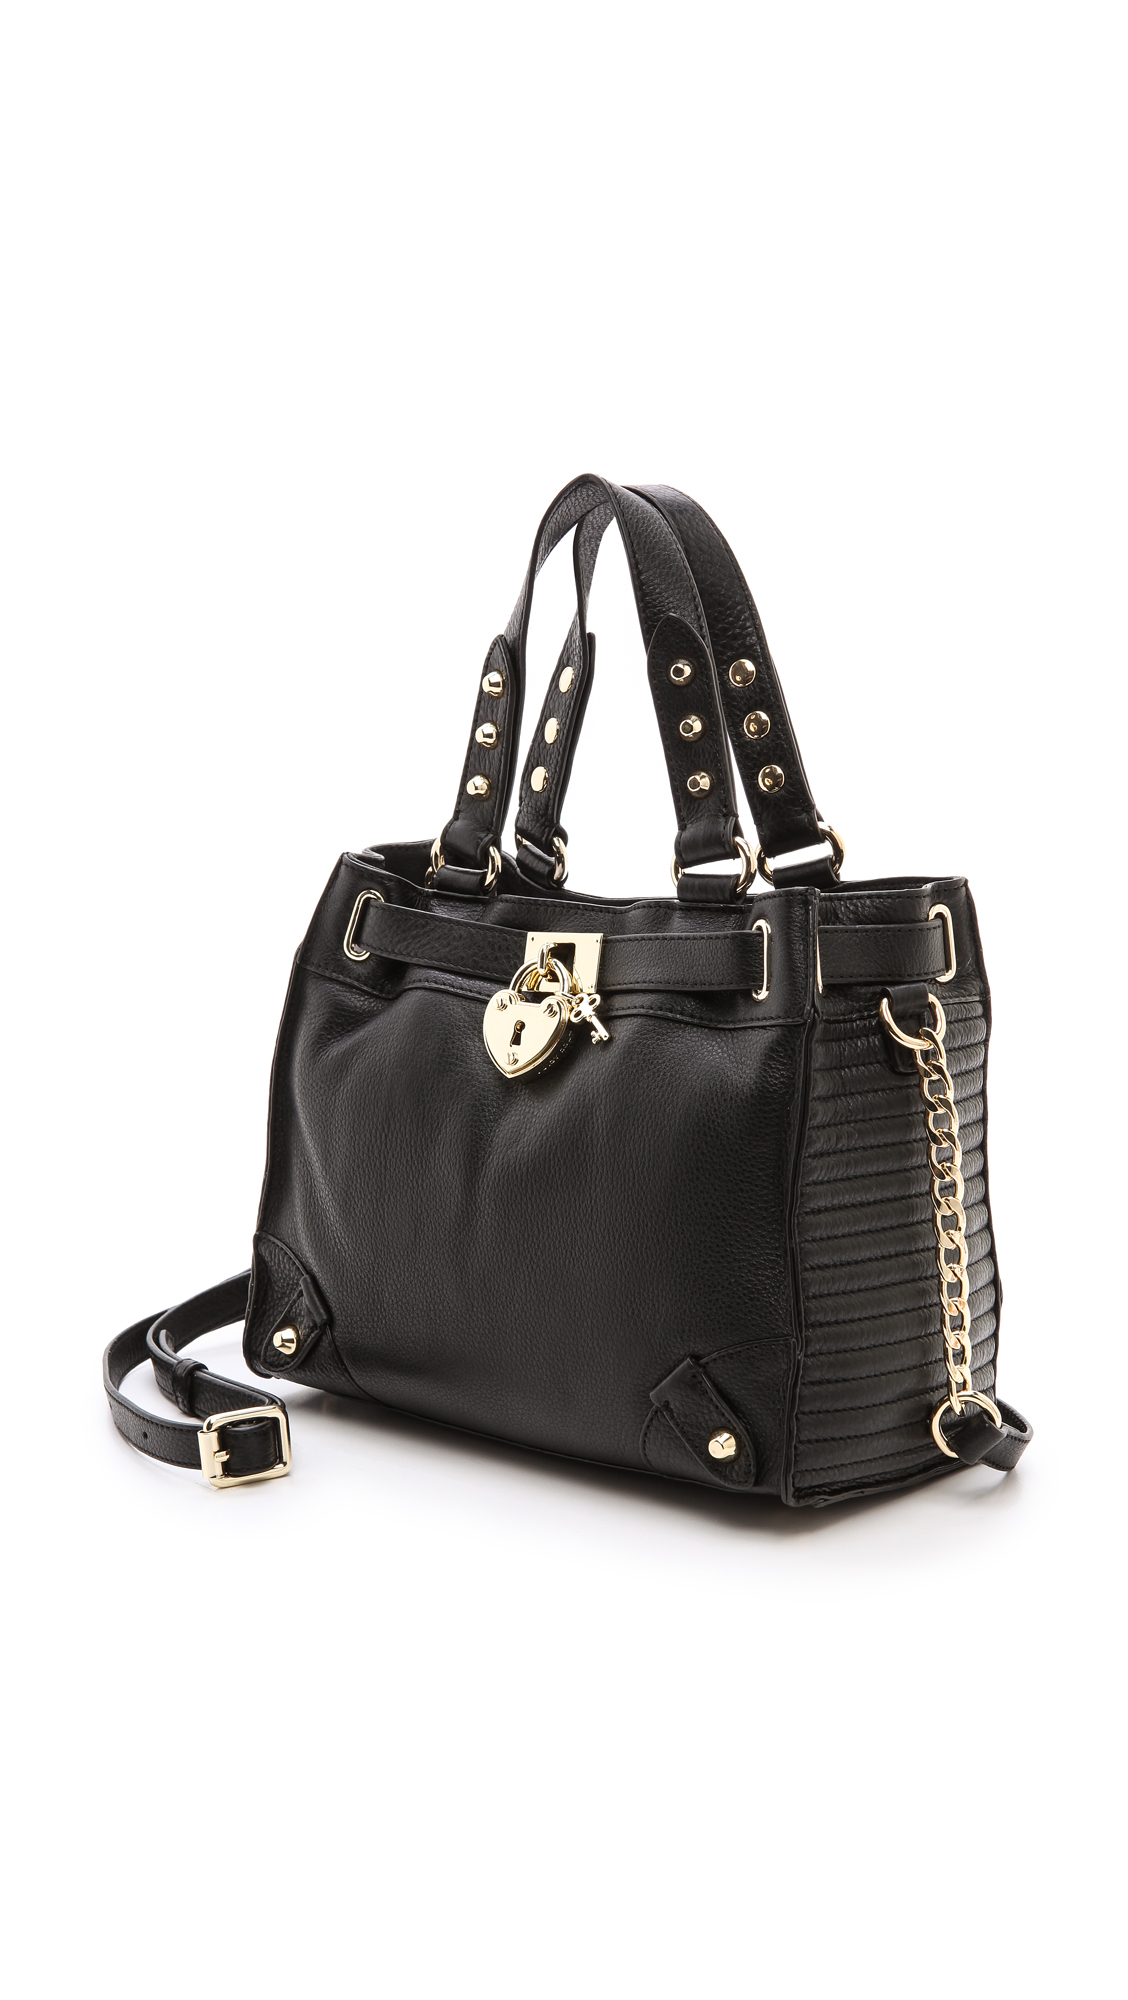 Juicy Couture Robertson Mini Daydreamer Bag Black in Black | Lyst